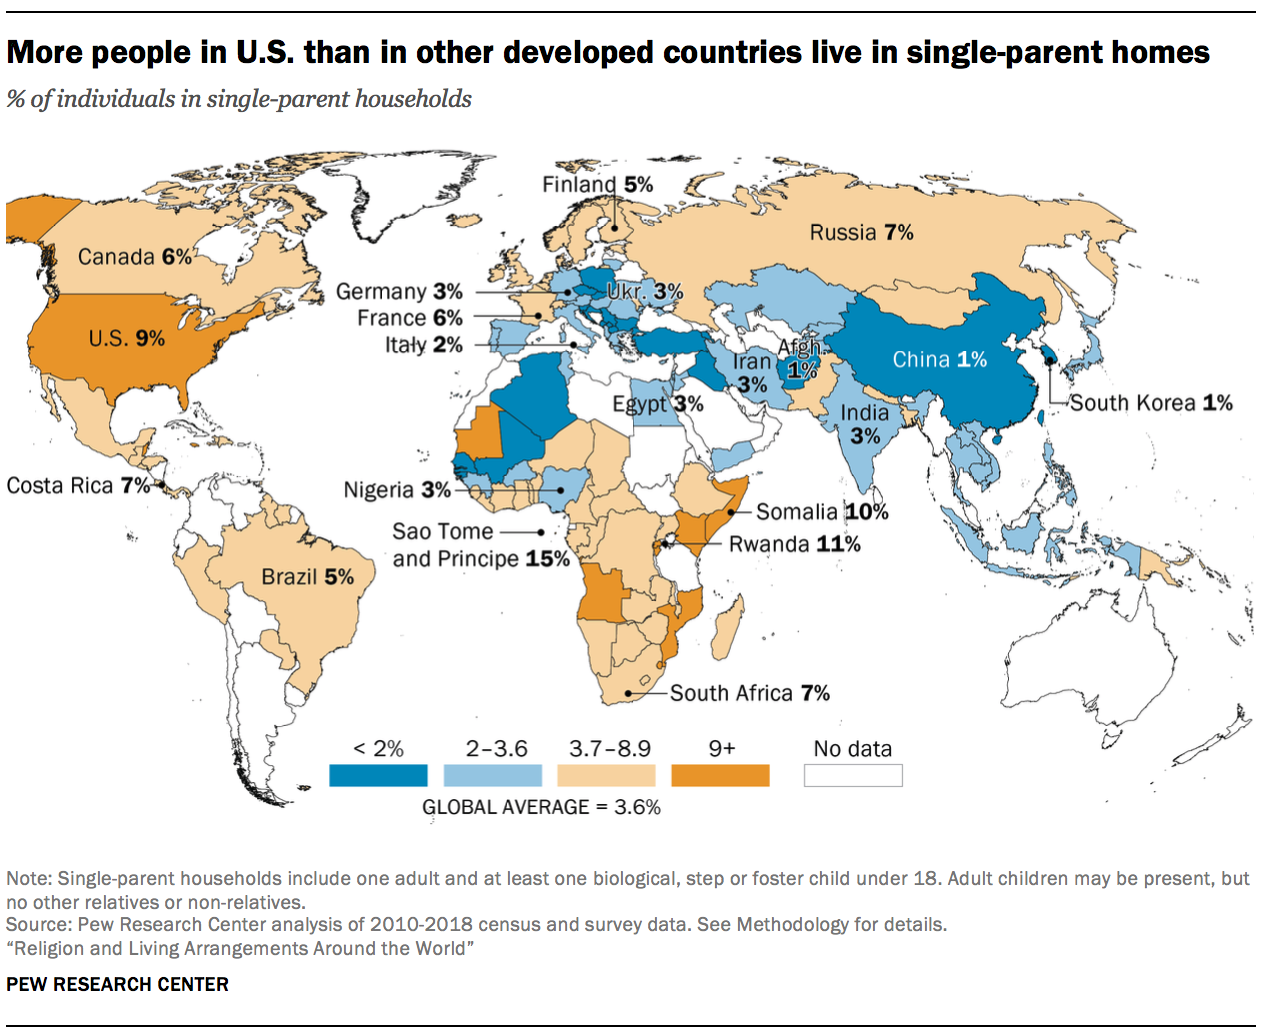 More people in U.S. than in other developed countries live in single-parent homes